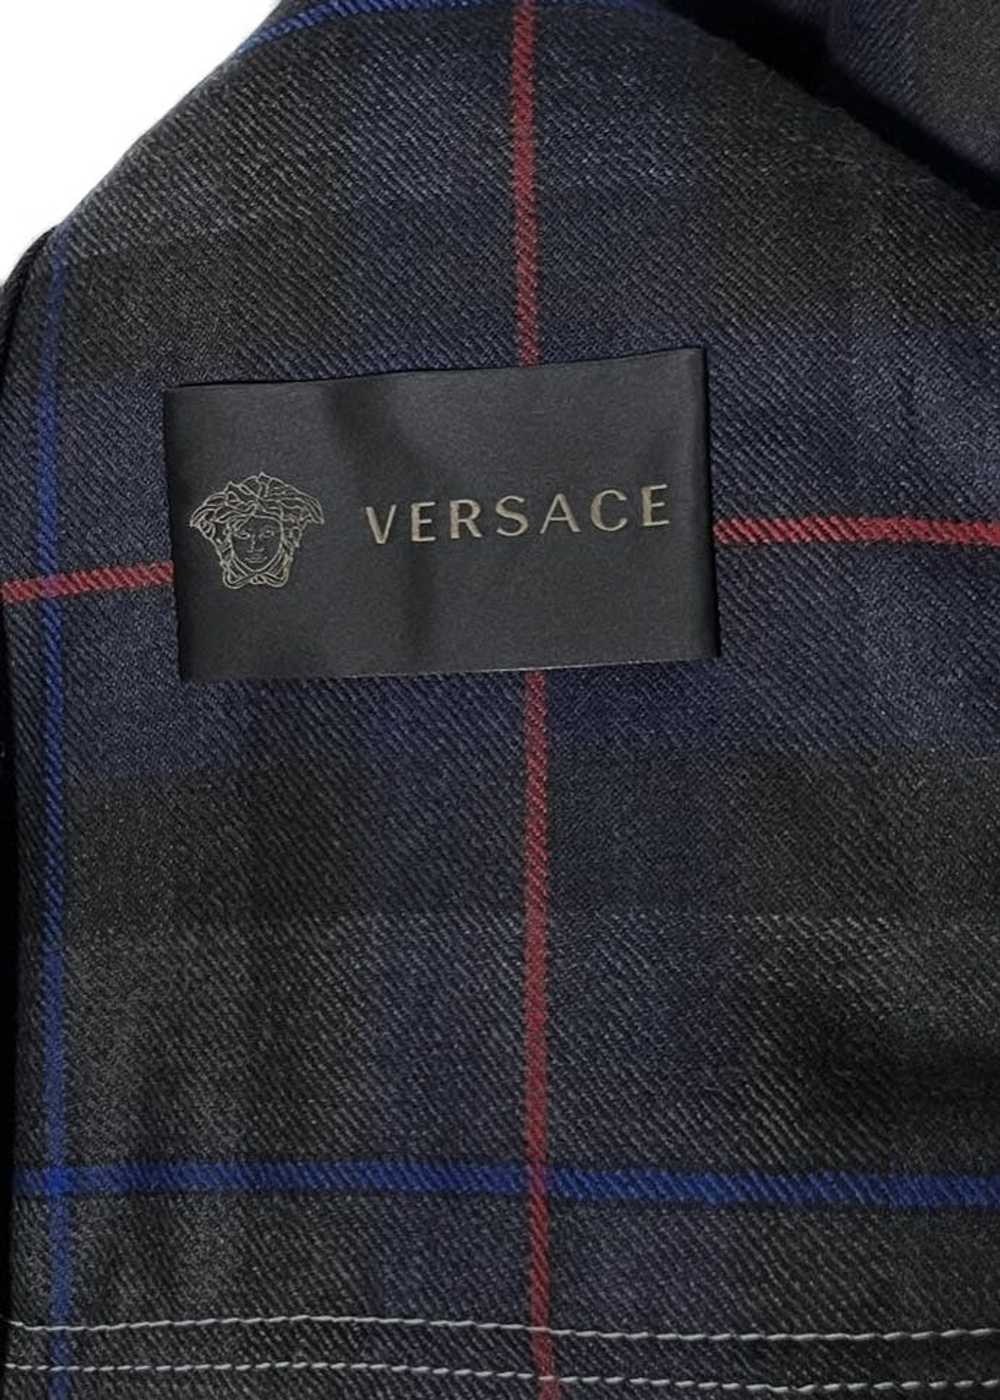 Versace Versace Black Wool Checkered Buttoned Jac… - image 6